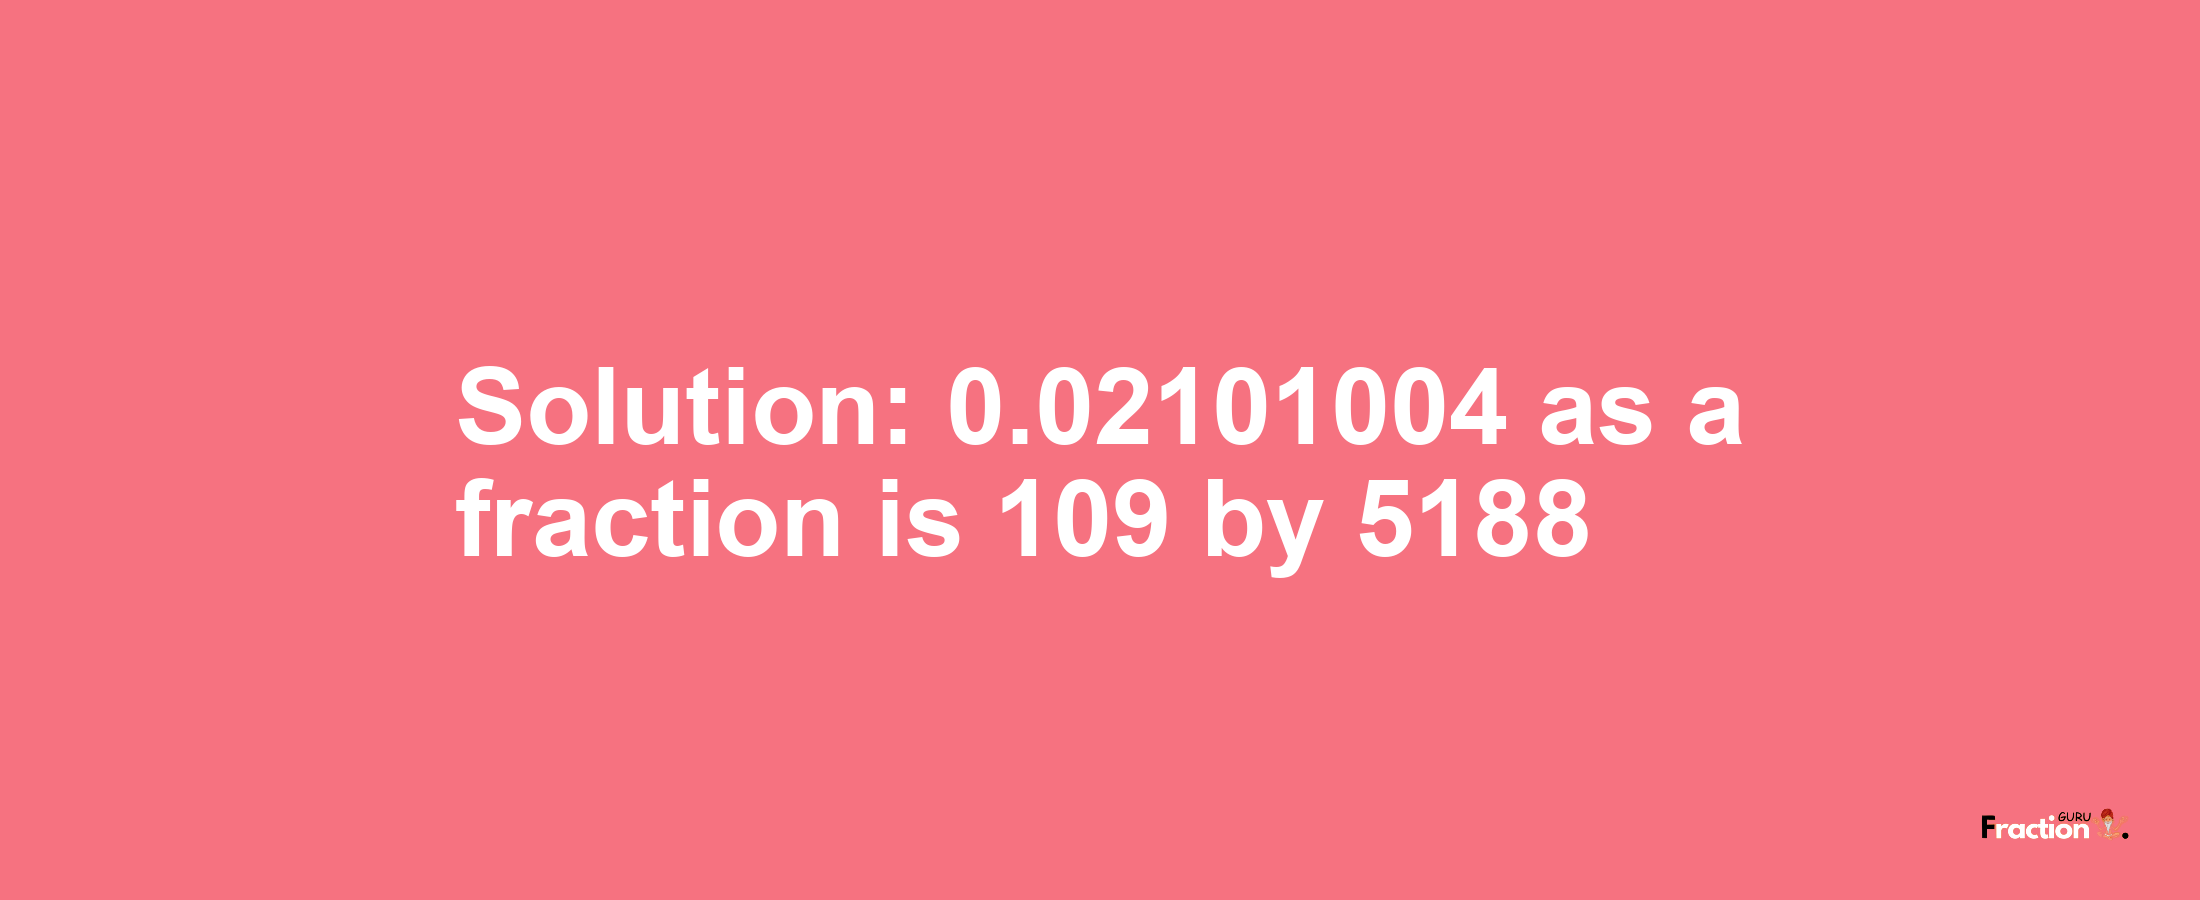 Solution:0.02101004 as a fraction is 109/5188